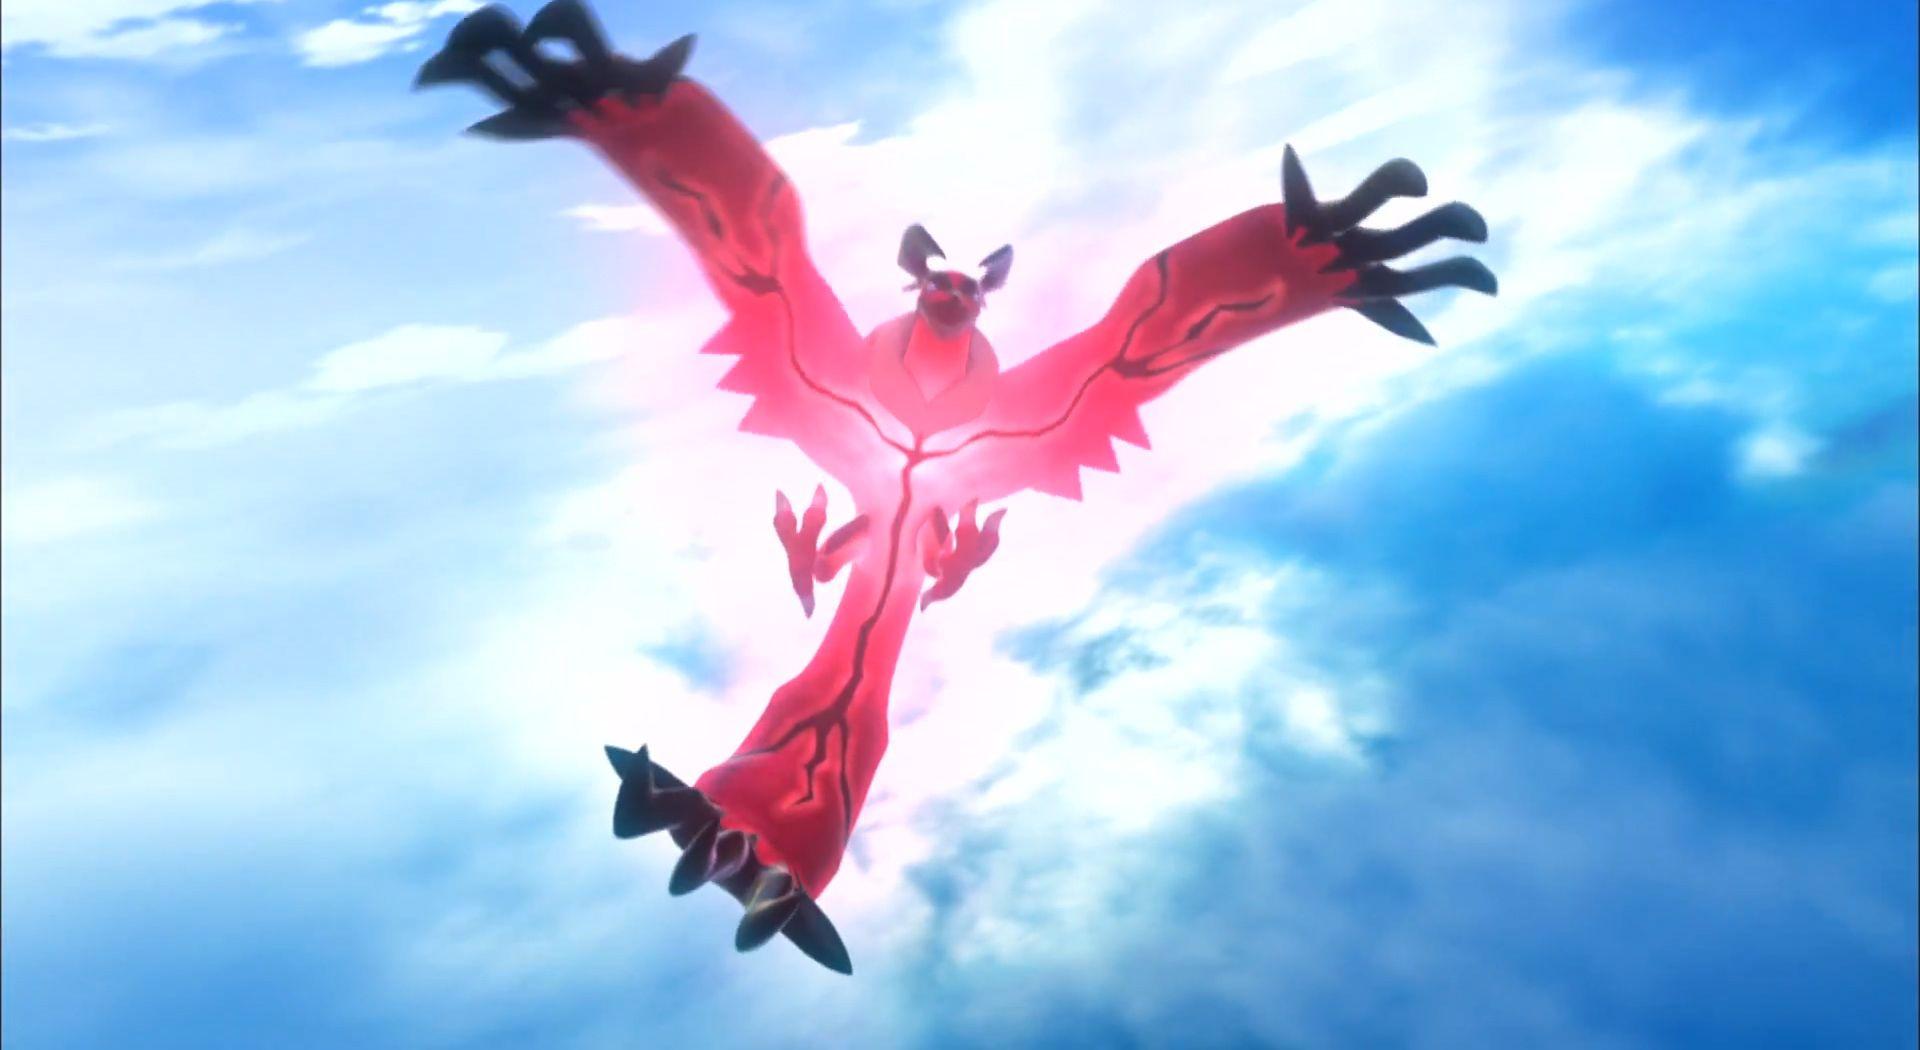 Yveltal Wallpaper Image Photo Picture Background